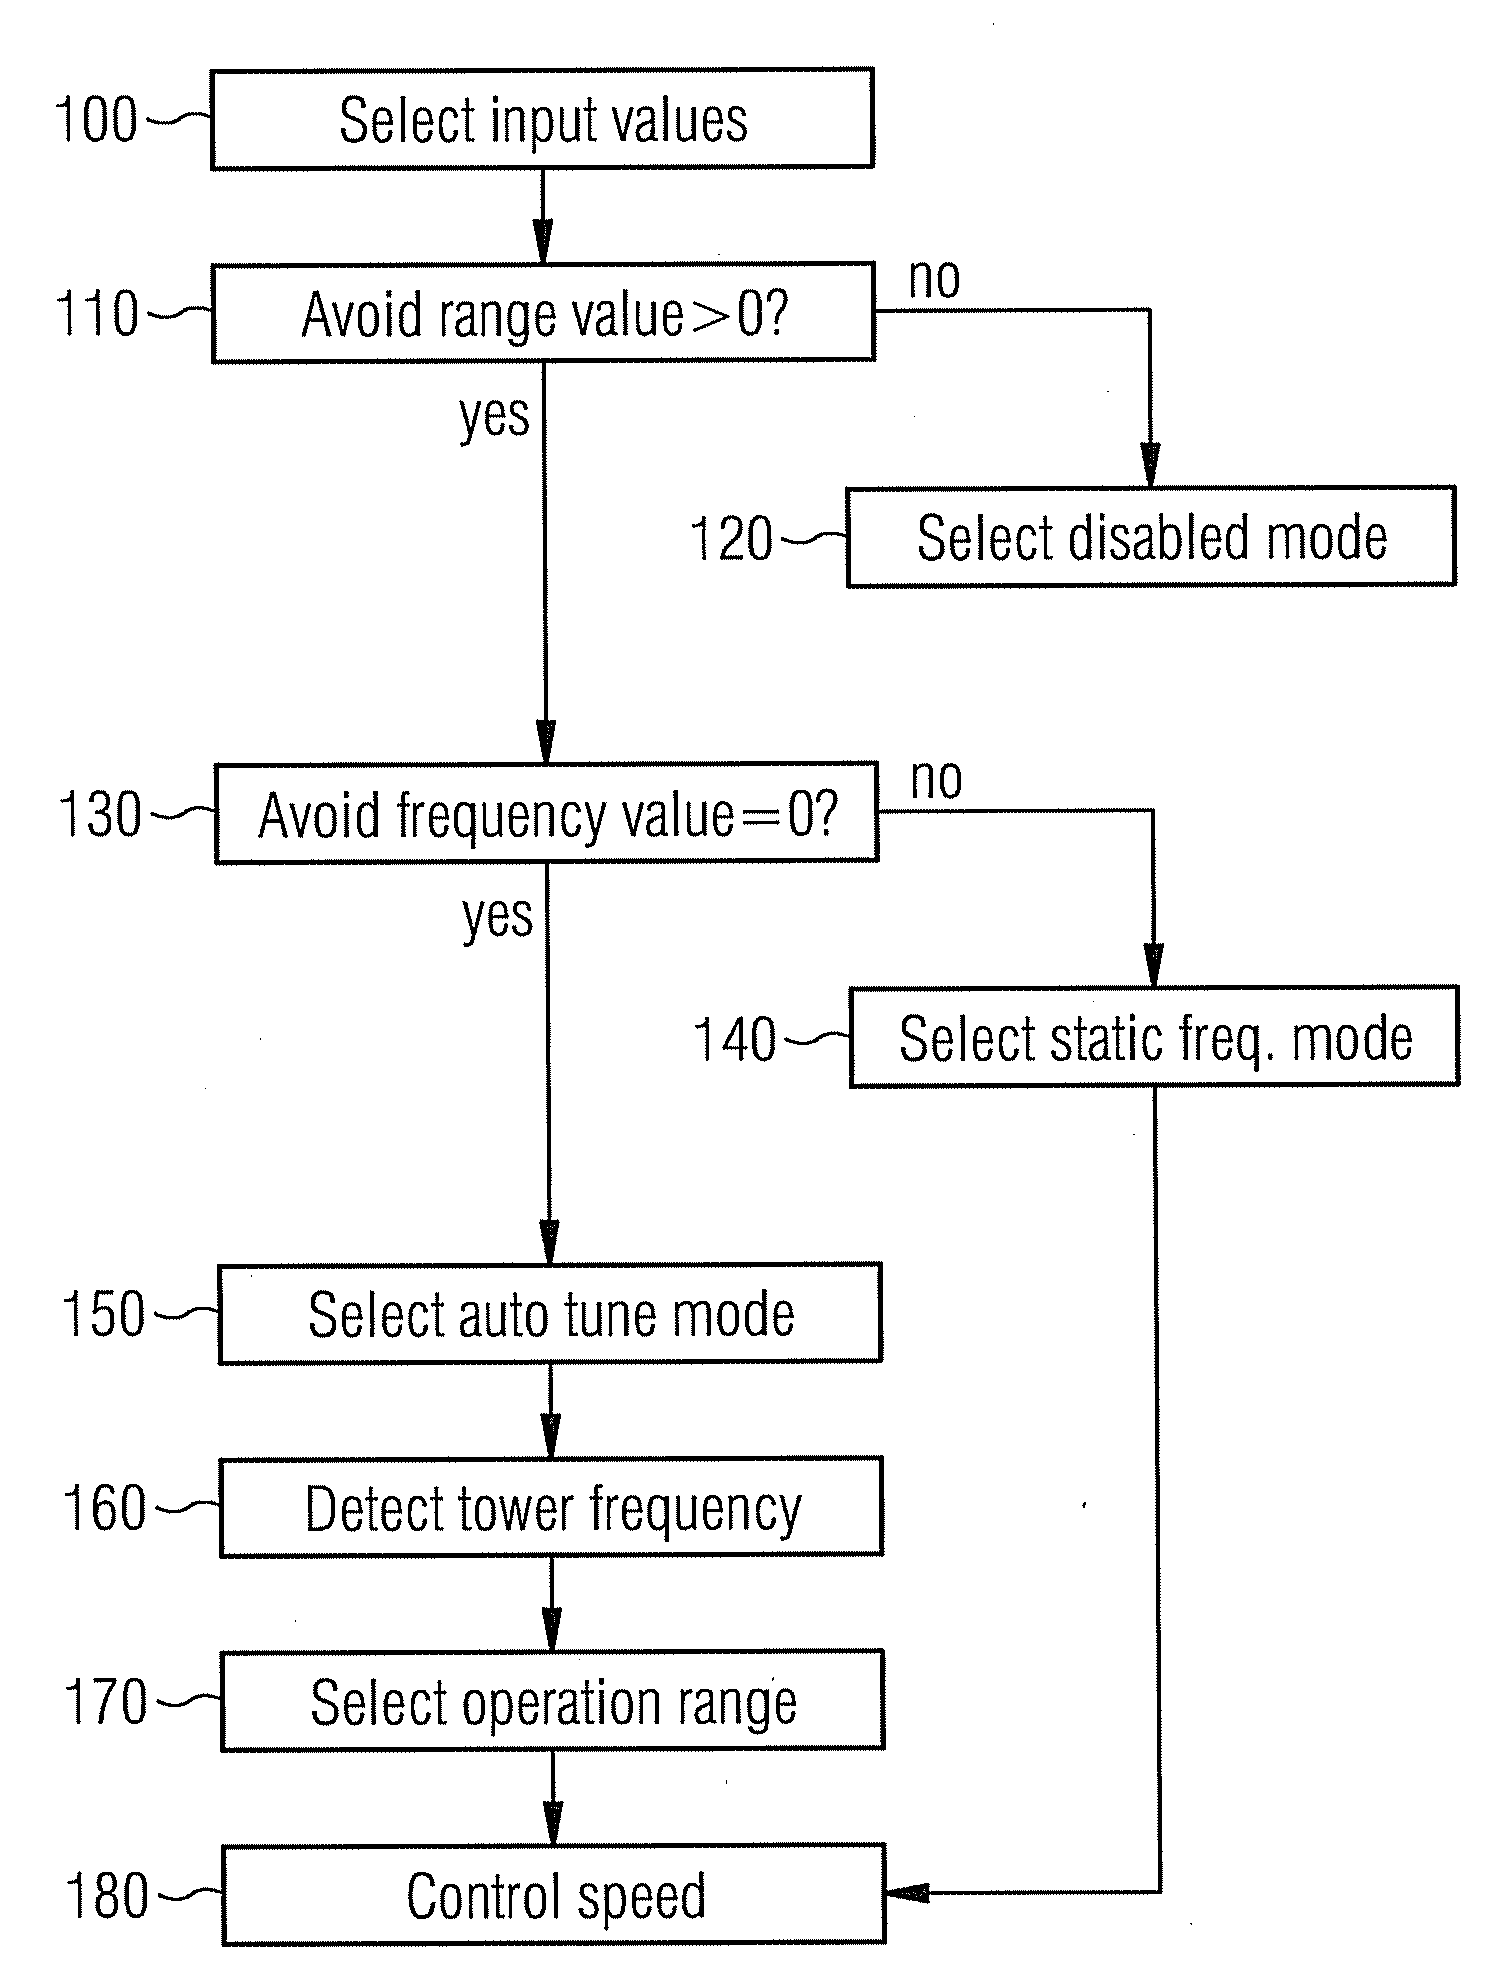 Method and apparatus for damping tower oscillation in a wind turbine